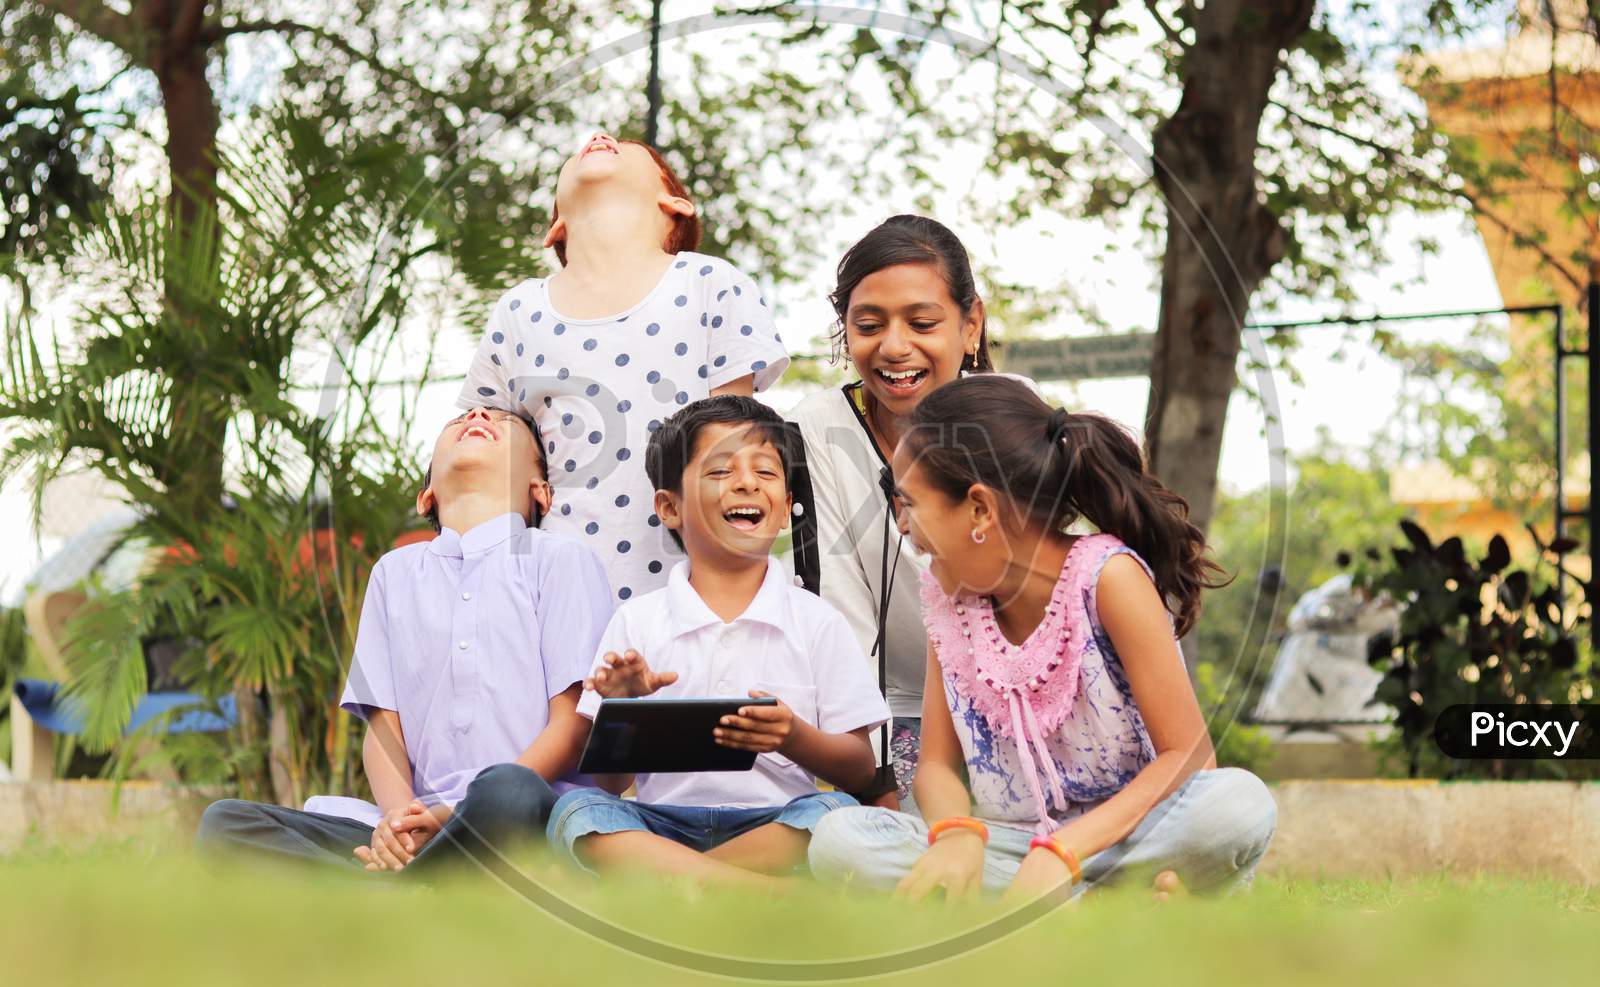 Group of Children using a Mobile or Smartphone and Laughing loudly in a Park or Outdoors